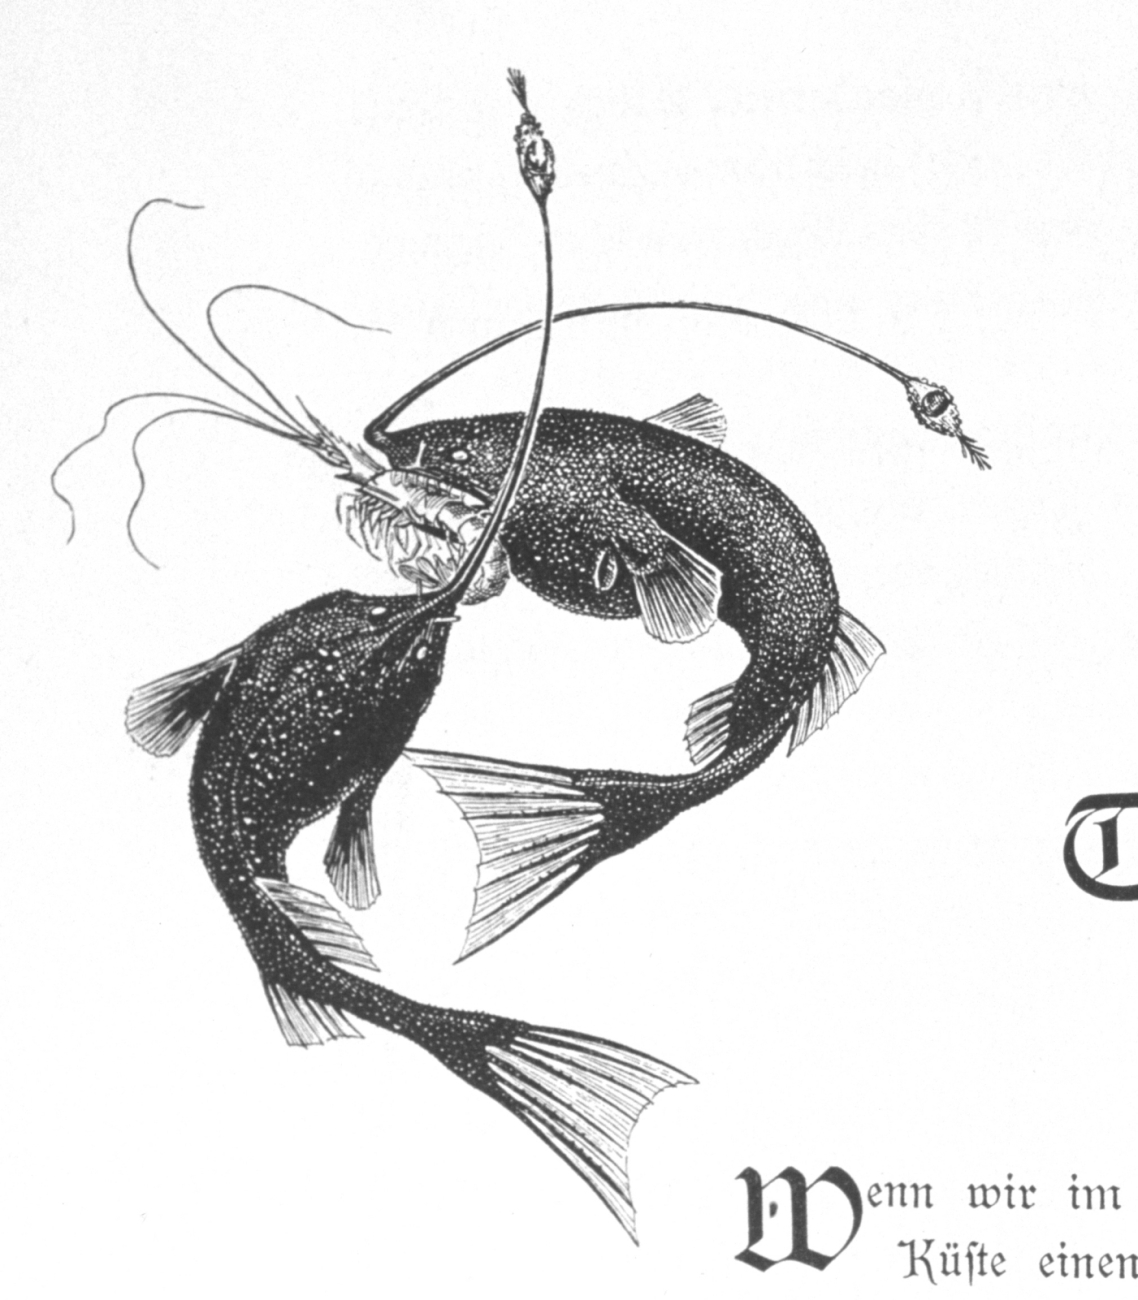 Illustration accompanying lead-in to chapters on Deep Sea Fauna